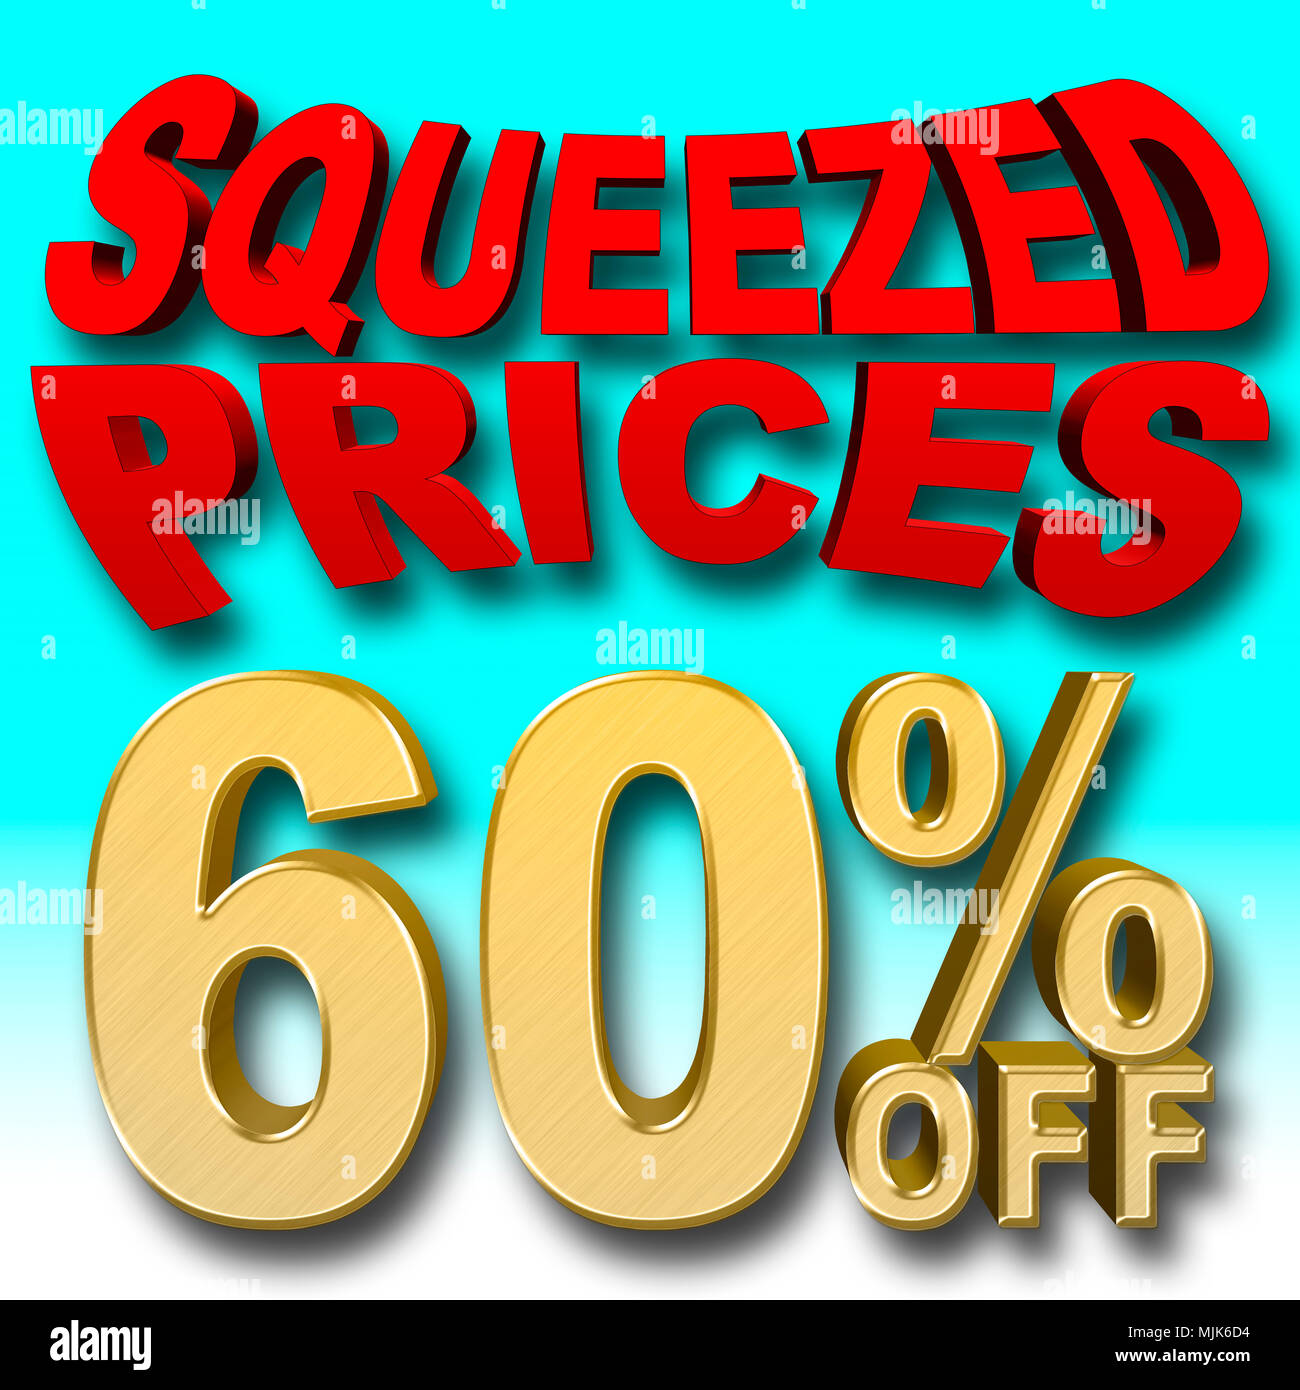 Stock Illustration - Golden Text: 60 Percentage Off, Red Text: Squeezed Prices, 3D Illustration, Blue Gradient Background, Different. Stock Photo